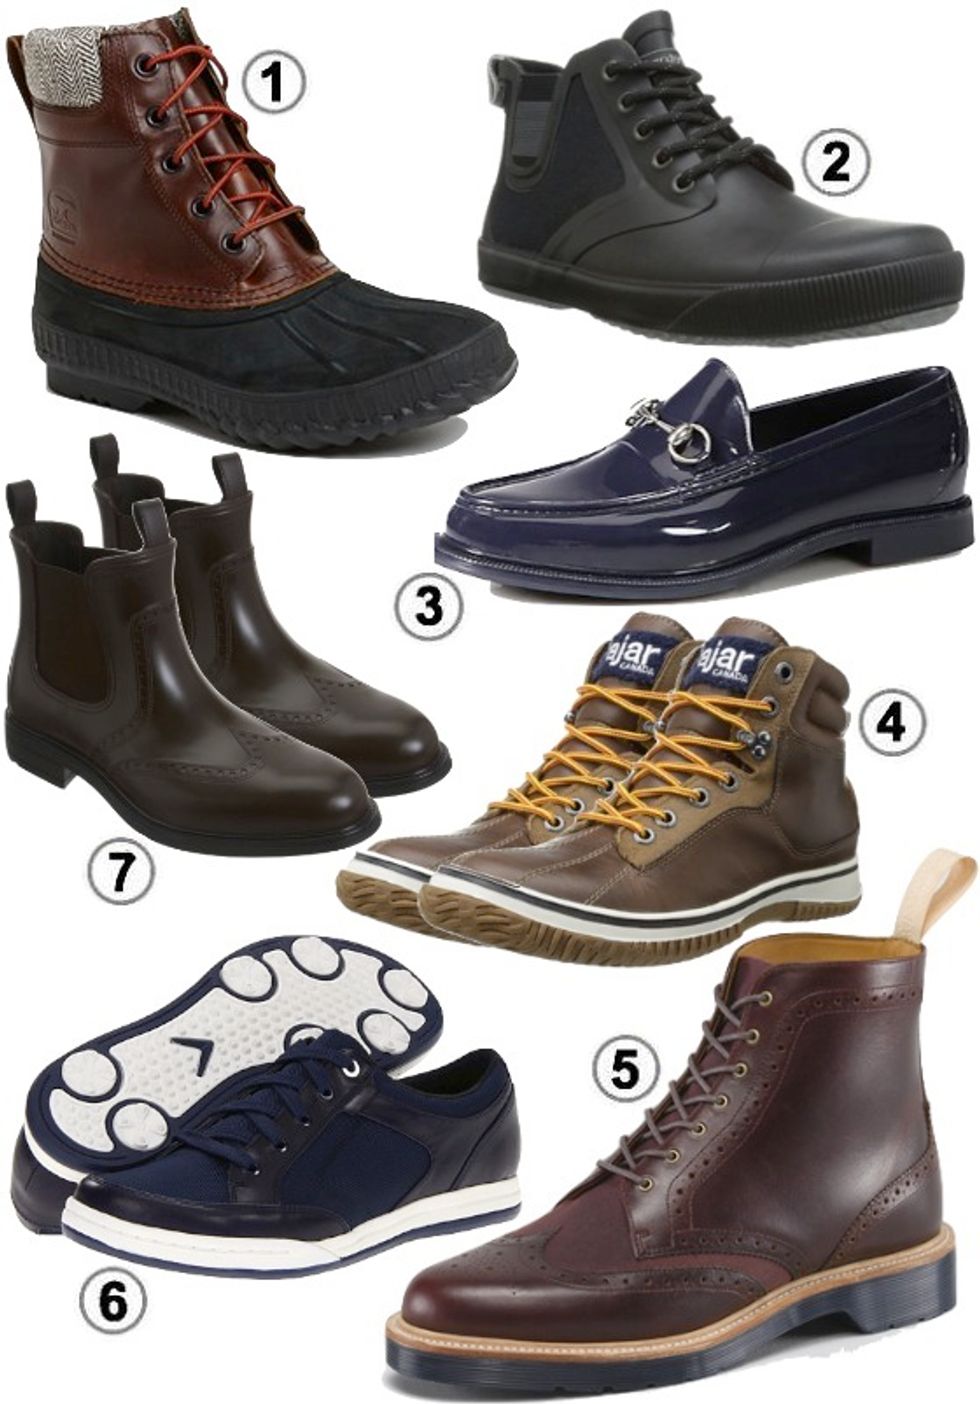 Look of the Week: Top Rain Boots for the Guys